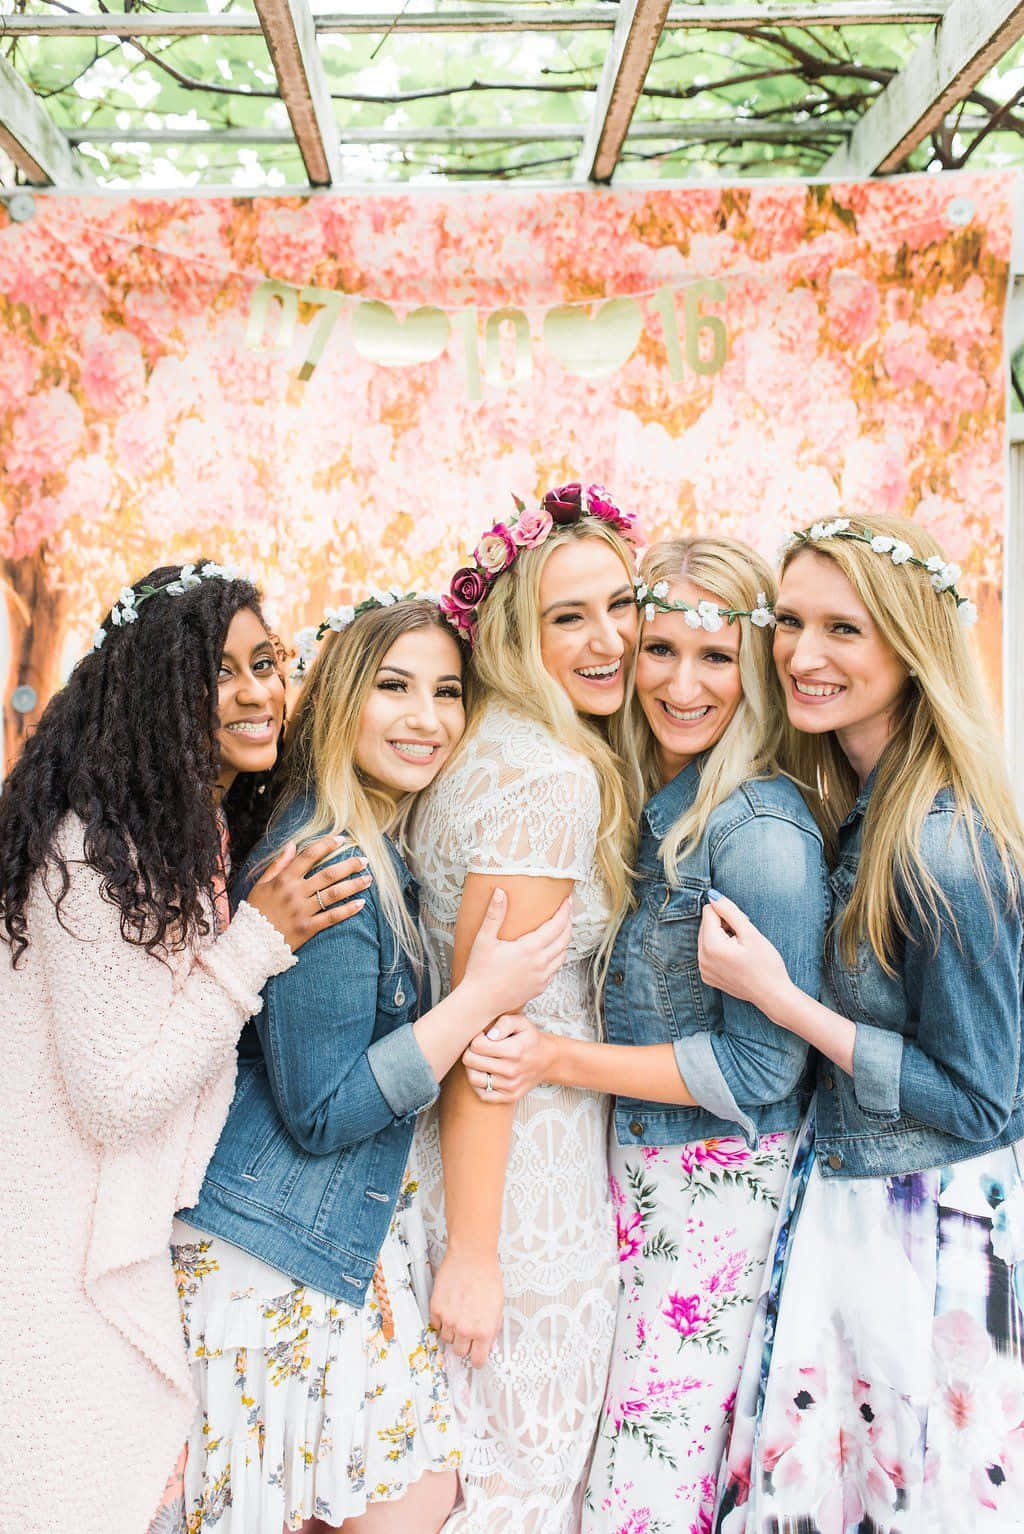 Bride With Four Bridesmaids Bridal Shower Picture